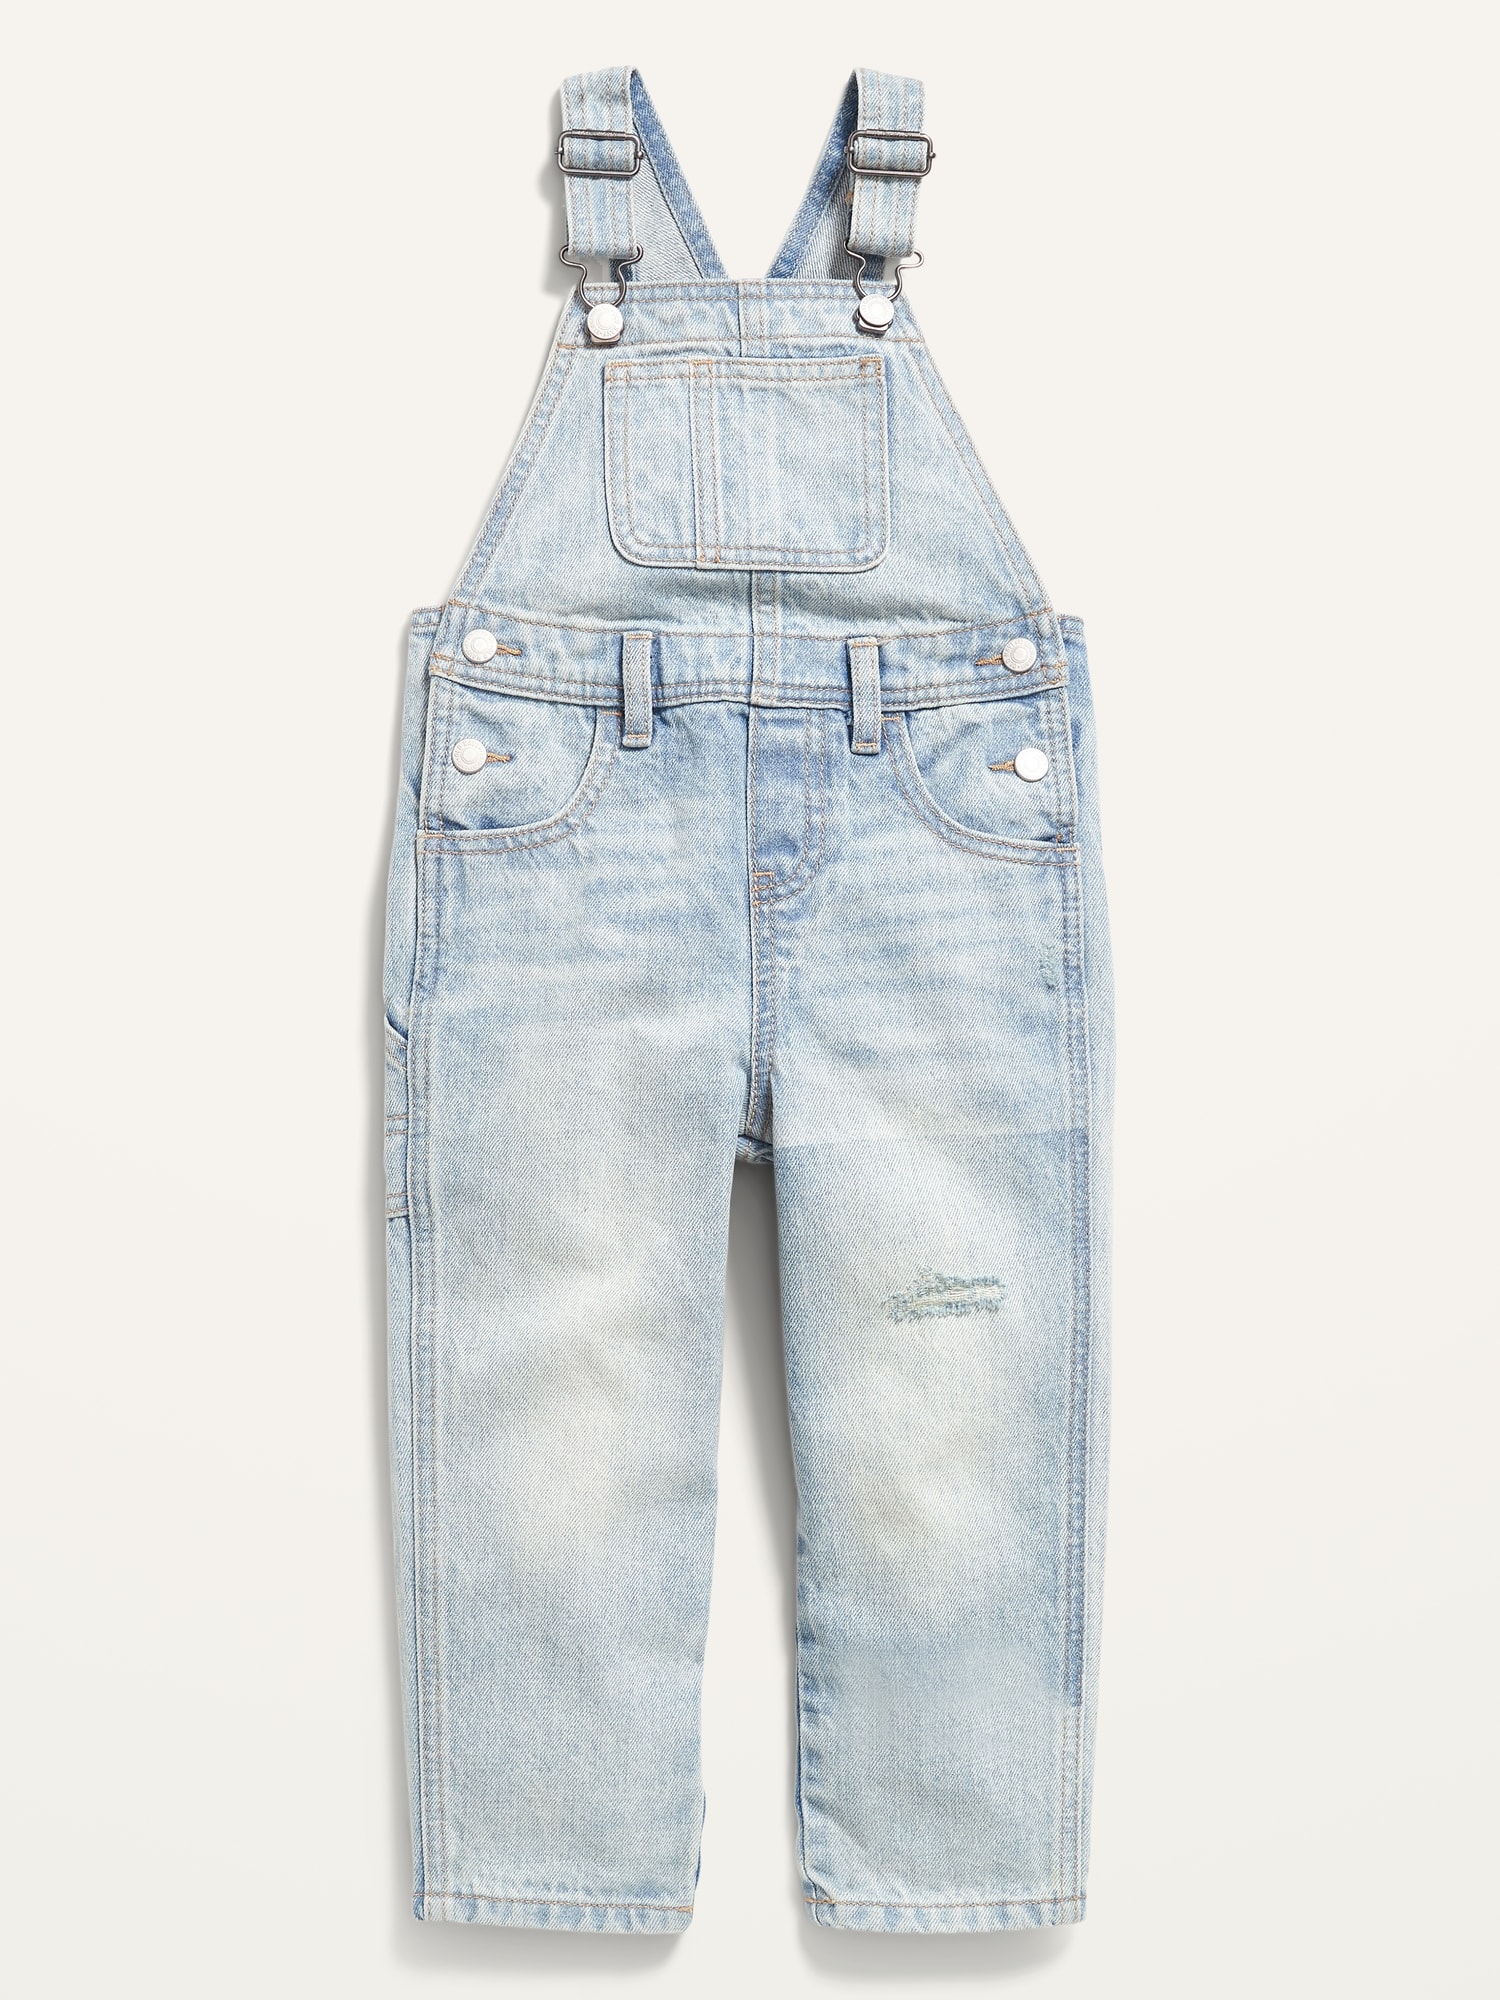 Unisex Distressed Light-Wash Jean Overalls for Toddler | Old Navy